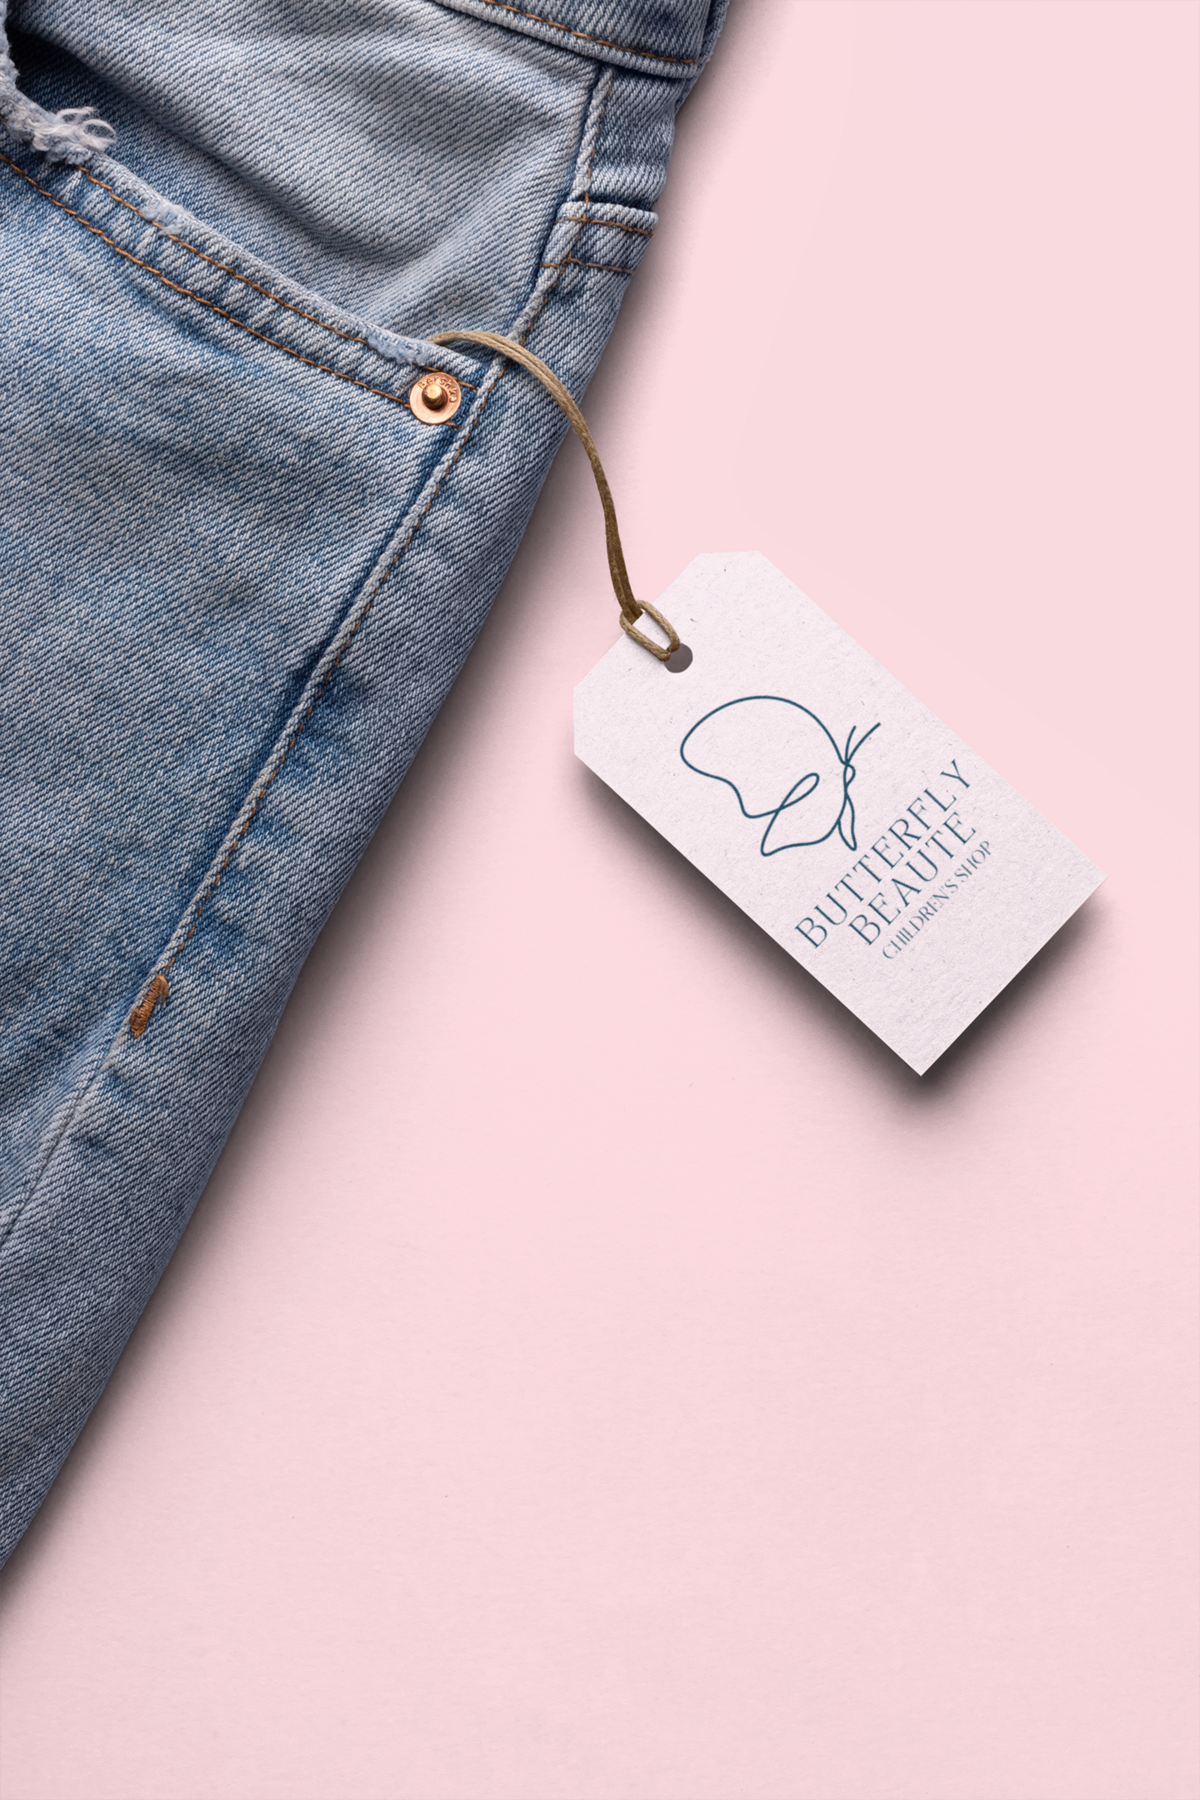 brand-tag-mockup-on-denim-jeans-against-a-flat-surface-27652